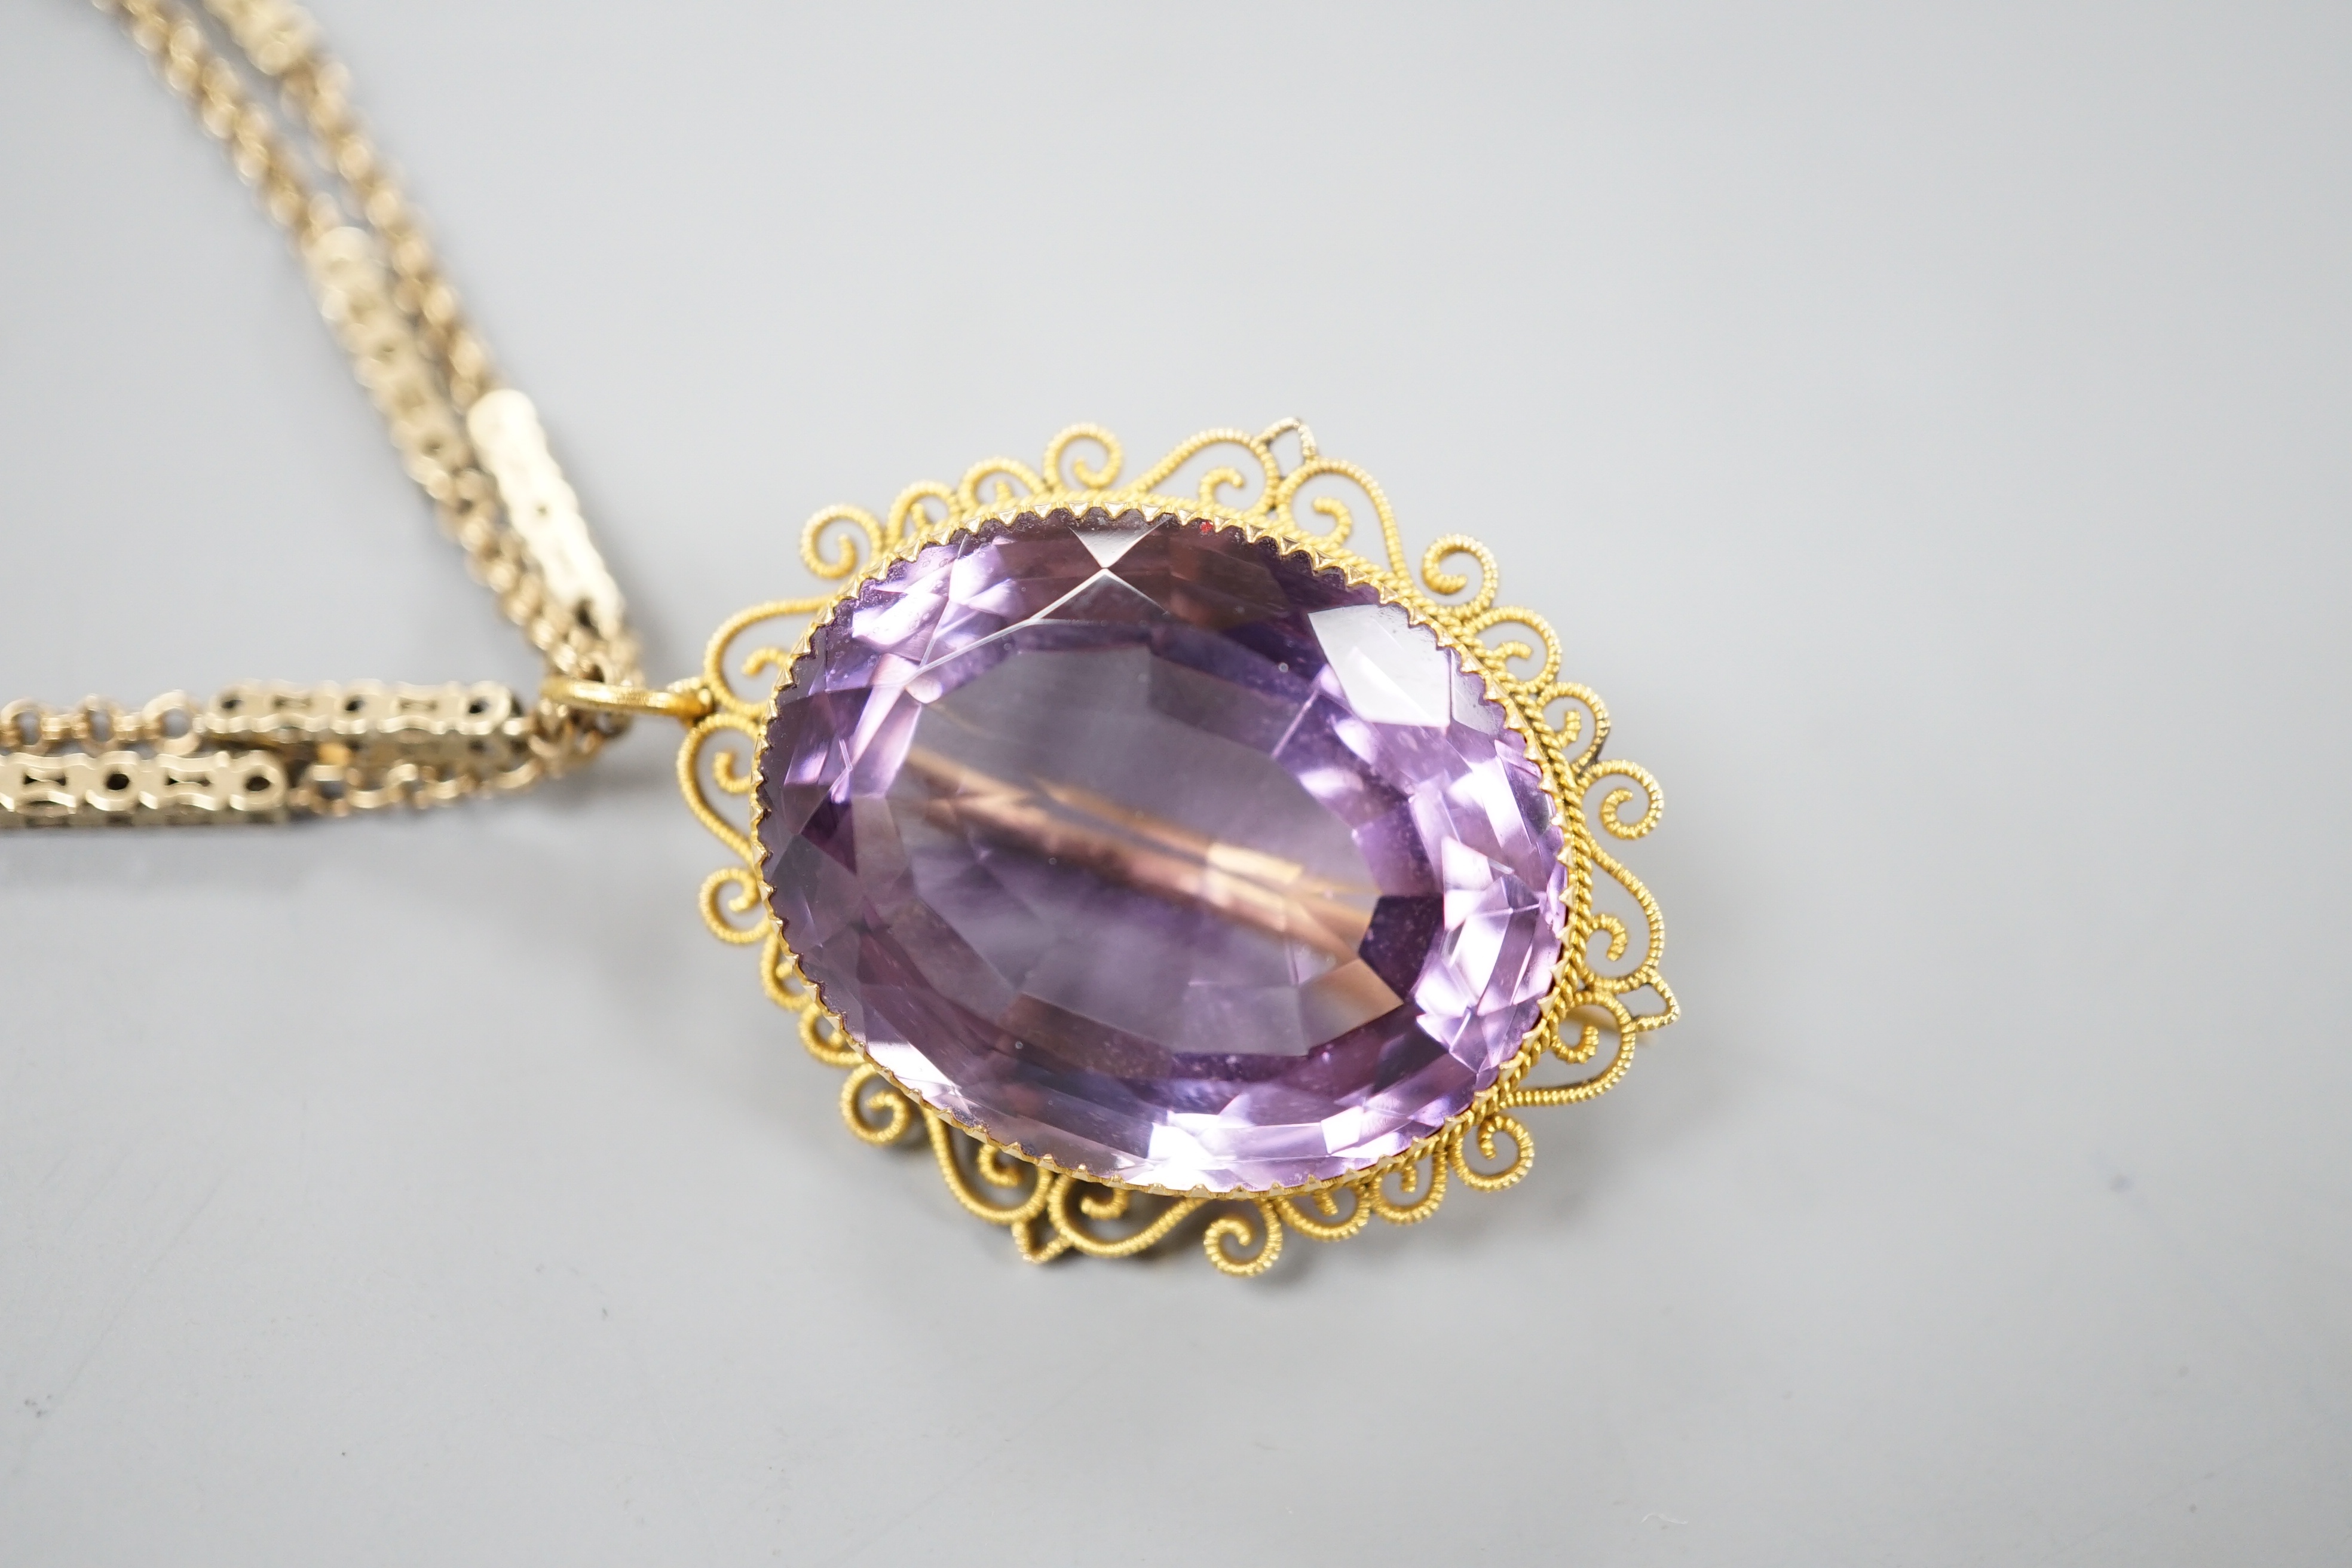 A yellow metal mounted oval cut amethyst pendant brooch, 34mm, gross 13.2 grams, on a Victorian pinchbeck guard chain, 70cm.